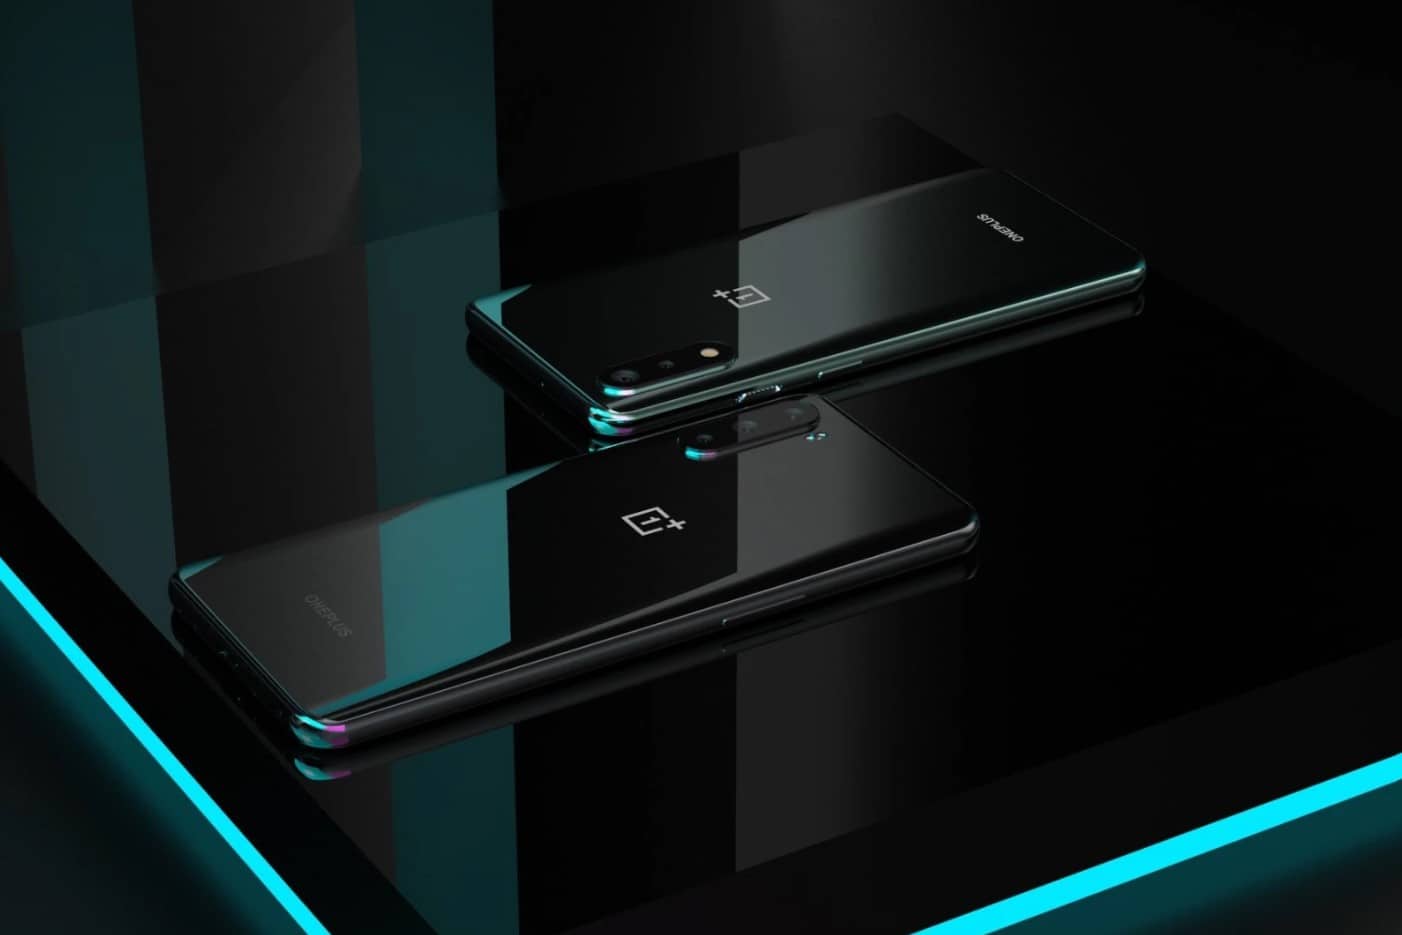 Details about OnePlus’ upcoming mid-range smartphones have just leaked online